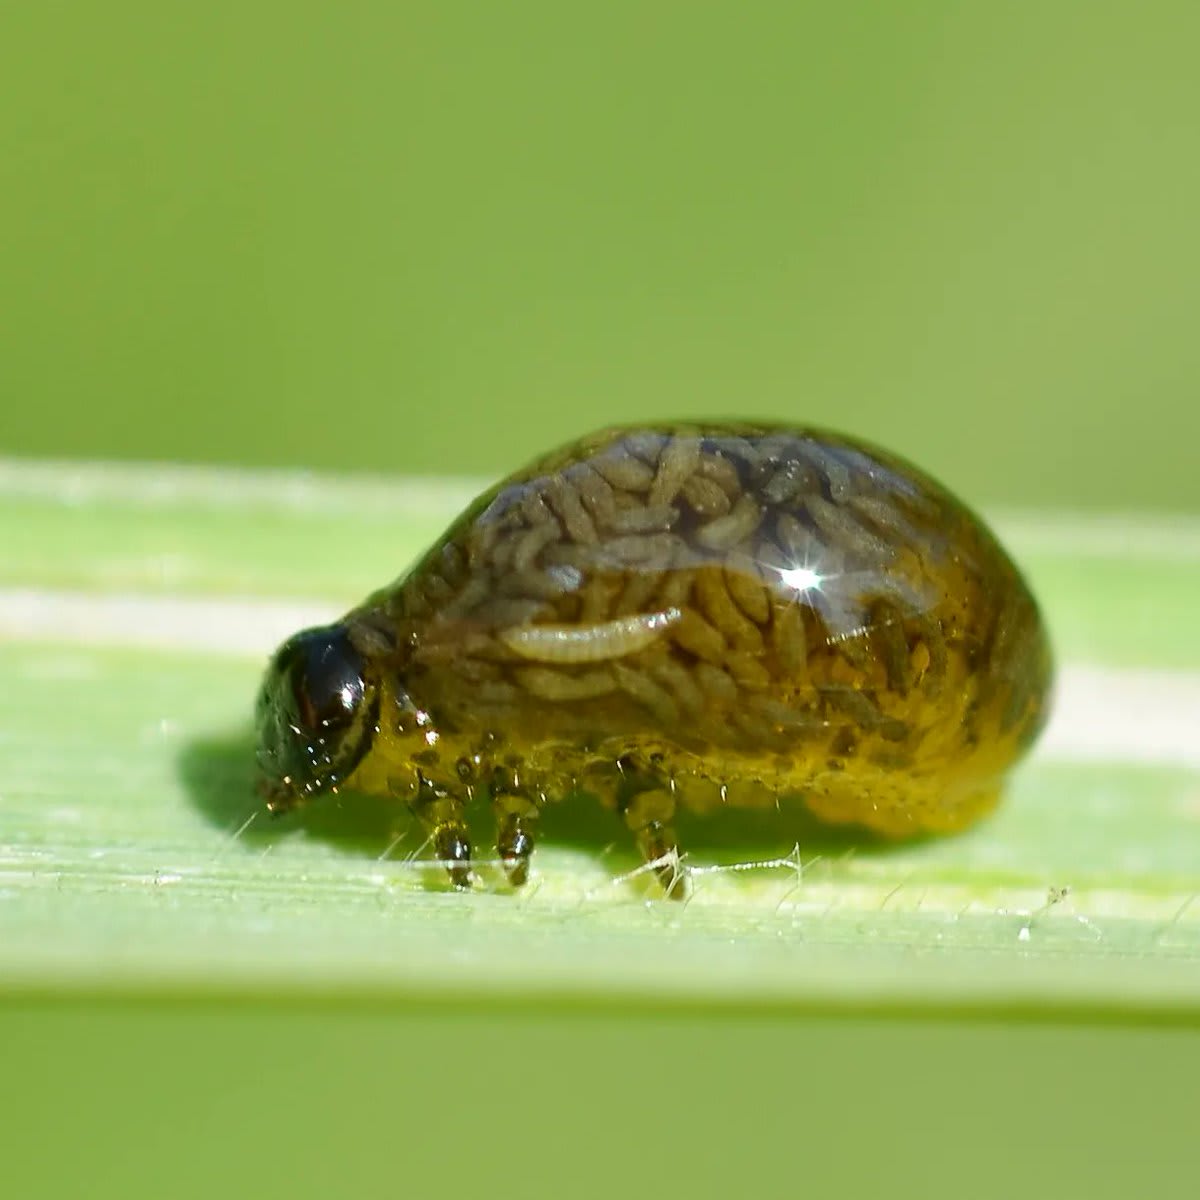 This revolting weirdo carries its own poop on its back 💩 Poop backpacks are not uncommon for leaf beetle larvae (Cassidinae). Some are still gooey, while others encase theirs like this one, for camouflage, or parasite deterrent purposes. 📷 Gilles San Martin/Wiki/CC BY-SA 3.0